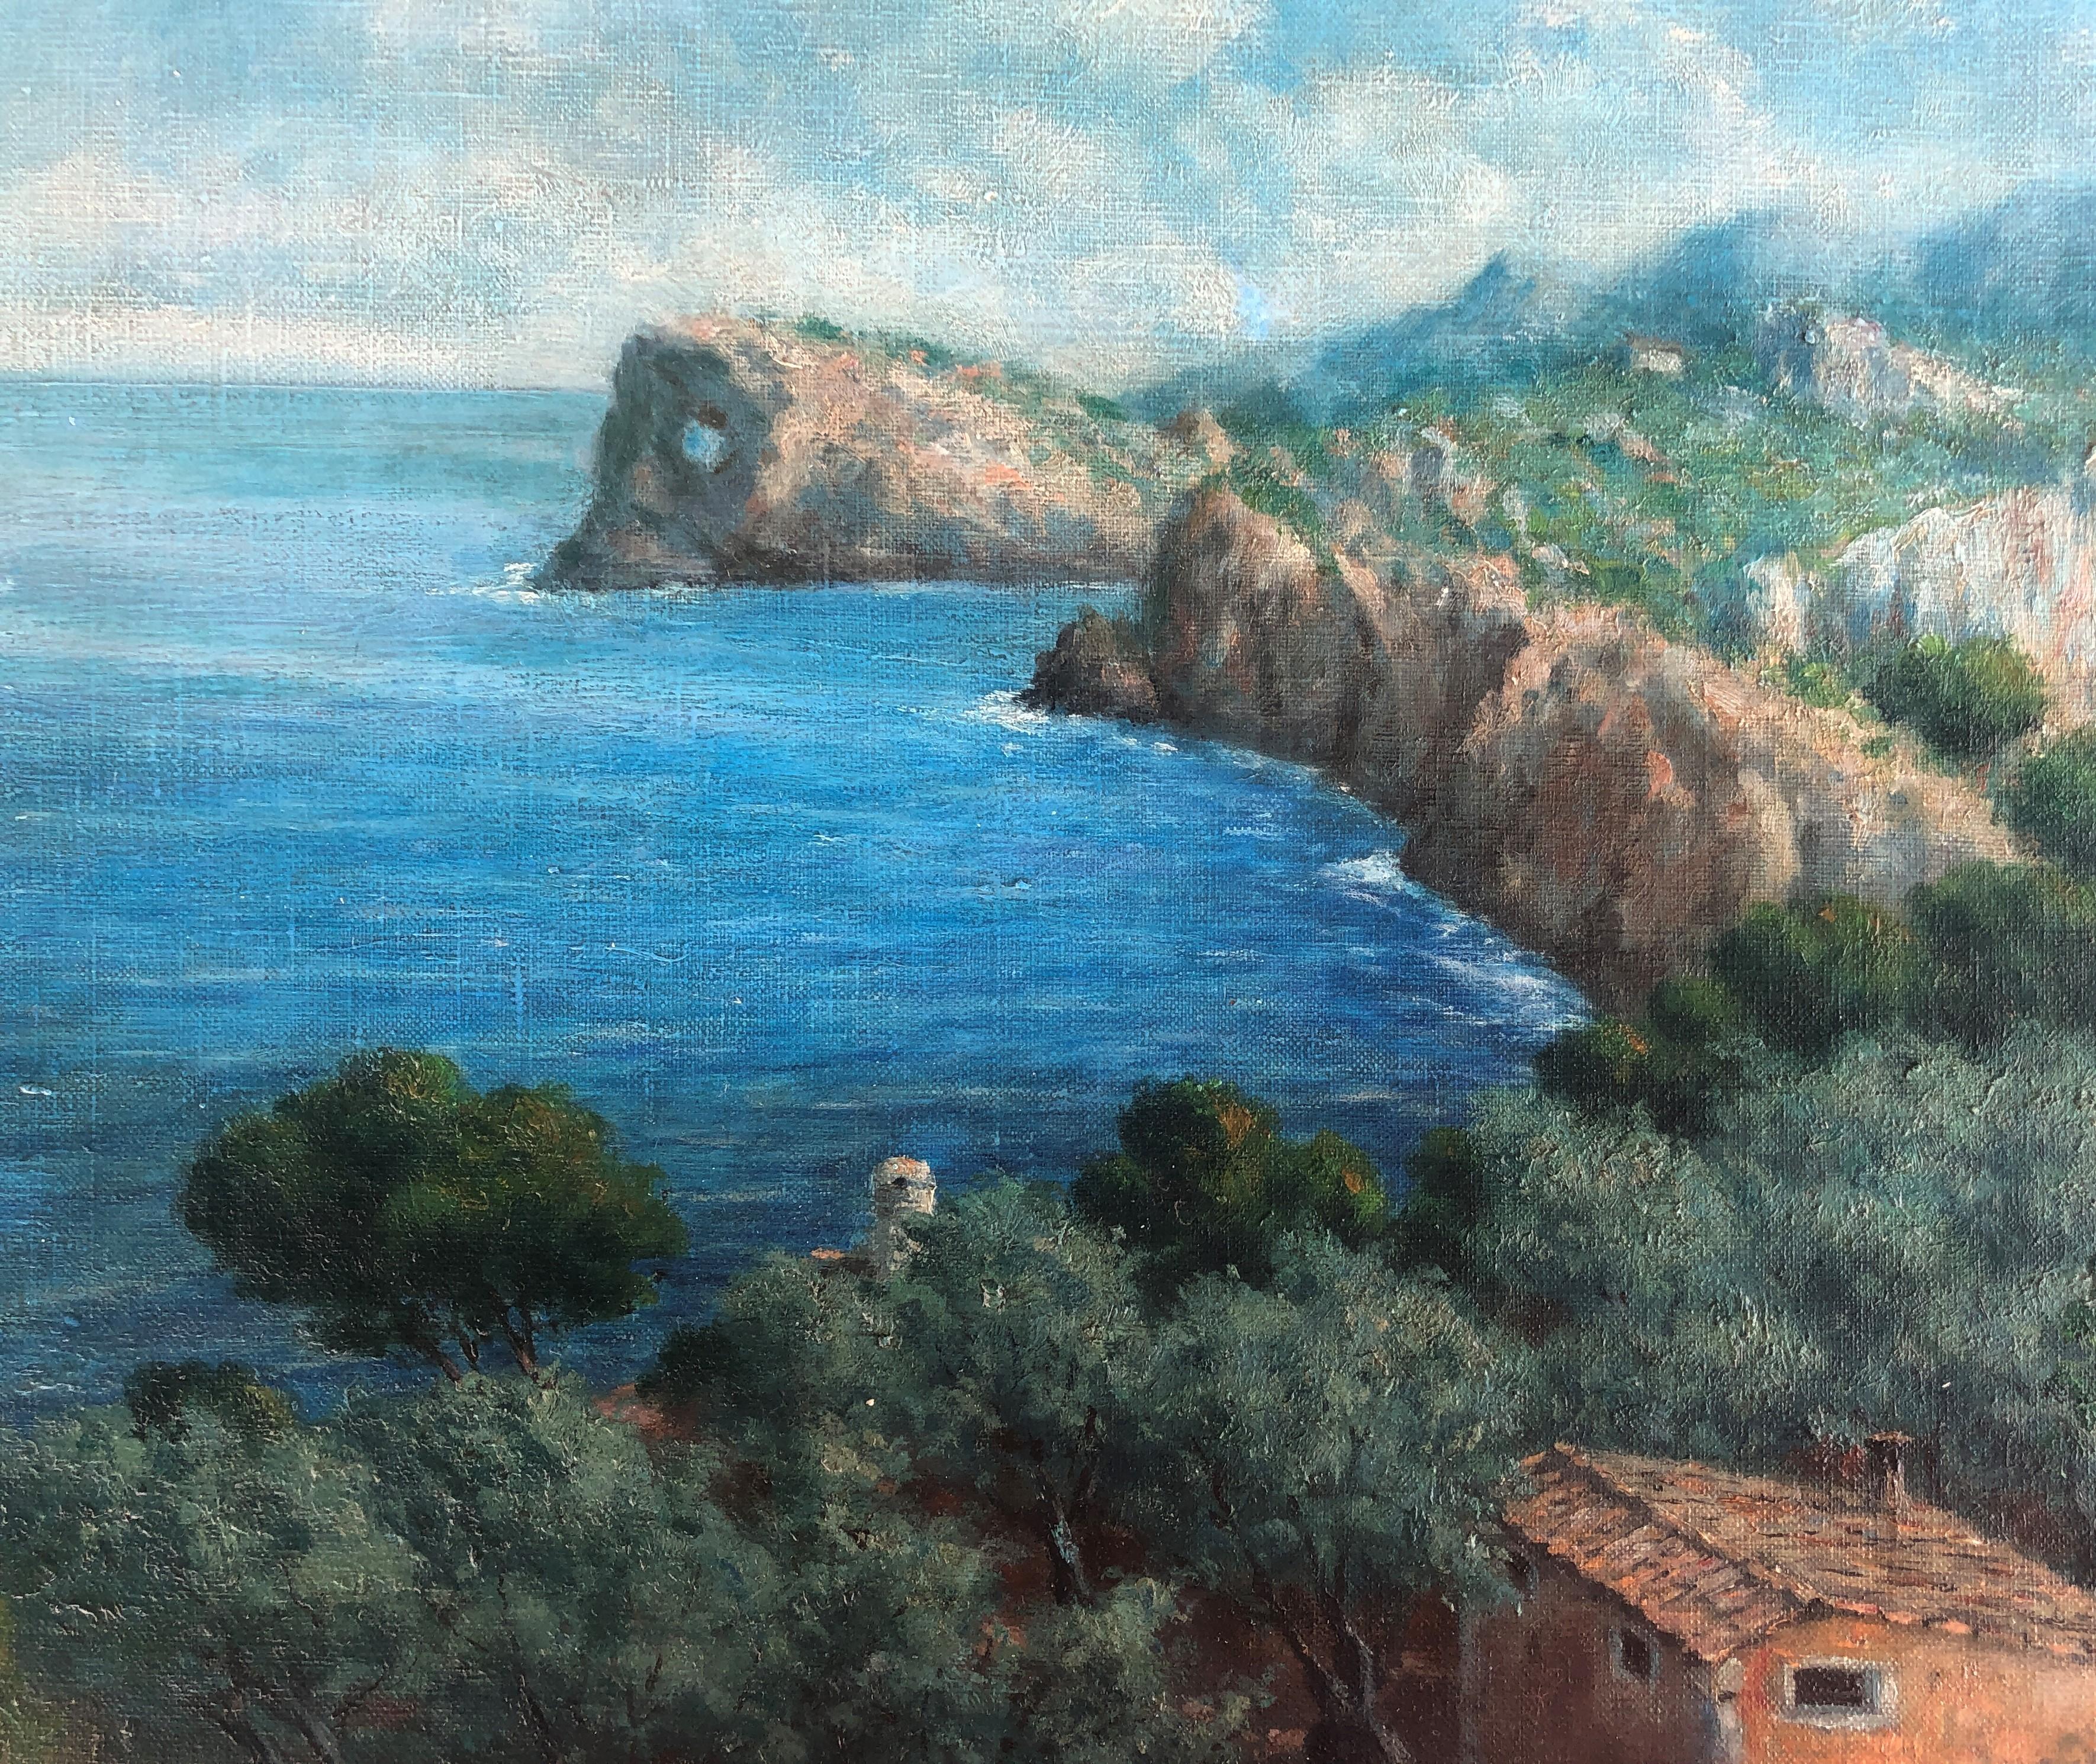 Oil measures 50x61.
Frameless.
Cleaning is recommended.

Miguel Forteza is a painter focused on the Mallorcan and Catalan landscapes. He is characterized by sea scenes, which is why he is considered a mariner and landscape painter. Palma de Mallorca